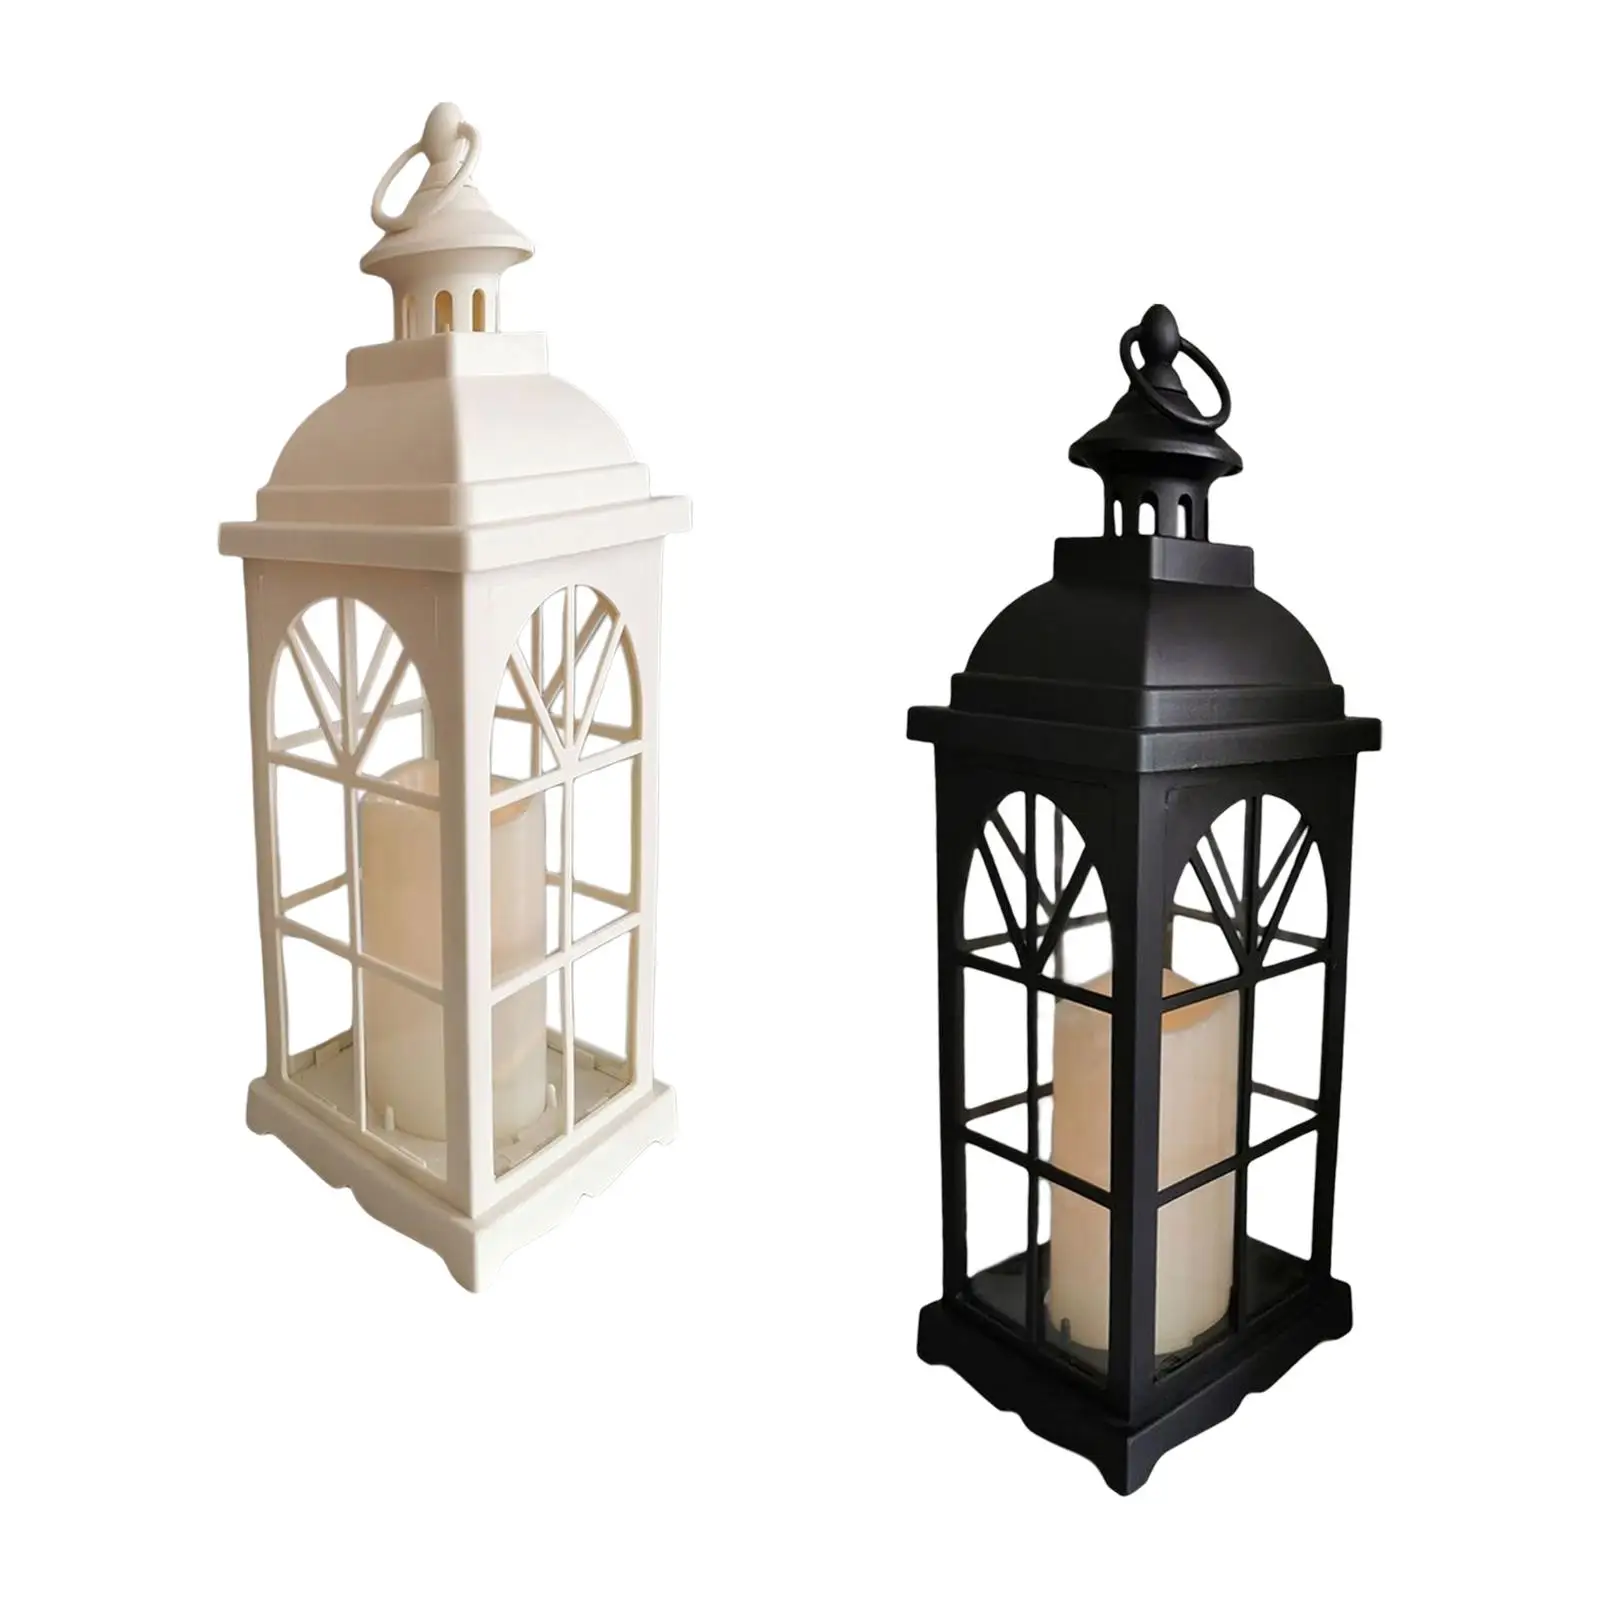 European Style Candle Lantern Candle Holder with Glass Candlestick Farmhouse Lantern for Home Outdoor Indoor Garden Yard Decor